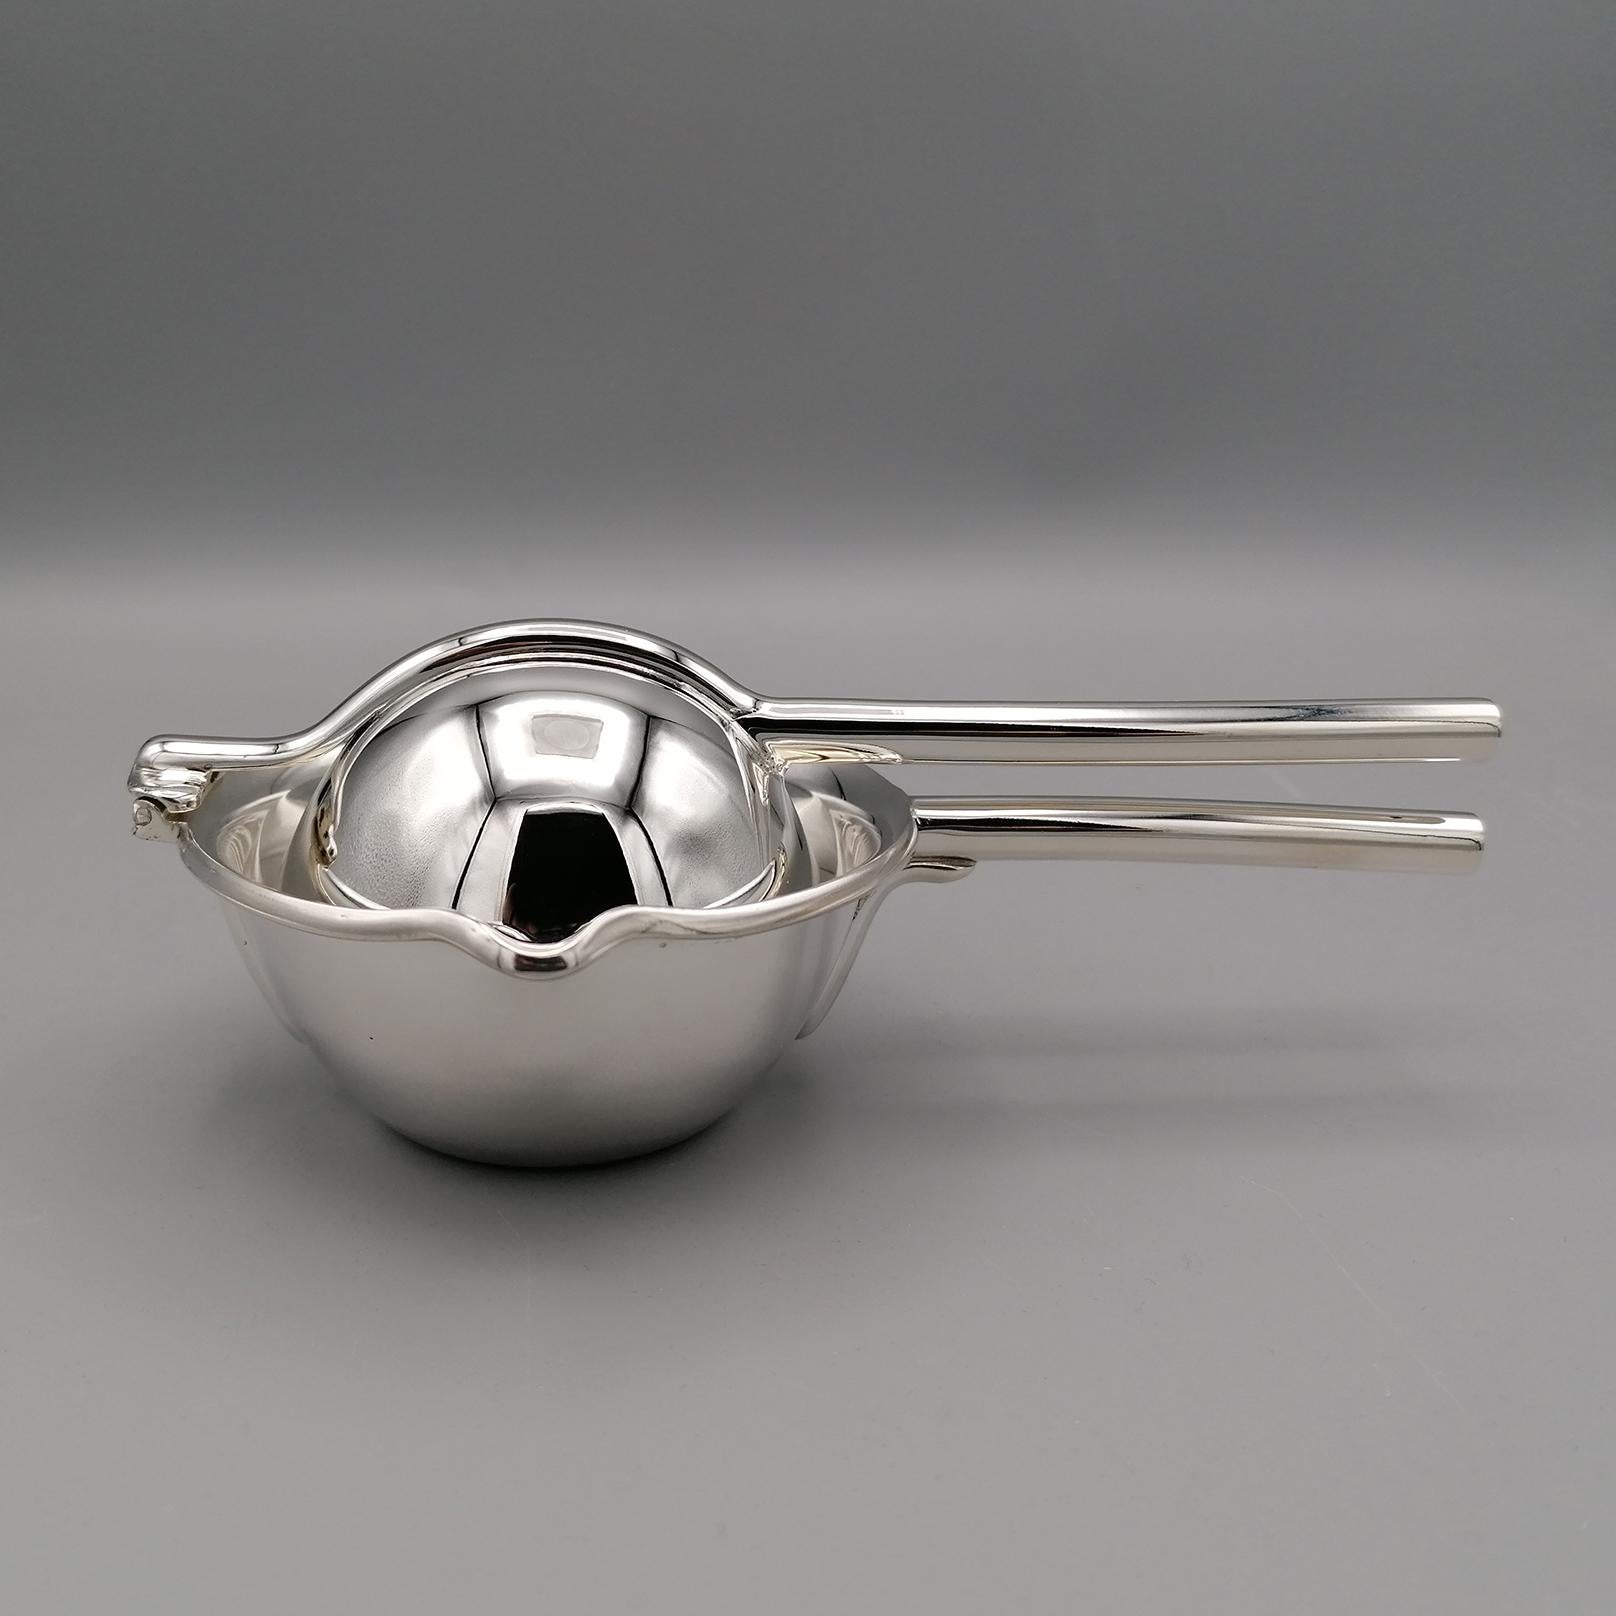 Italian 20th Century Italia Sterling Silver Juicer For Sale